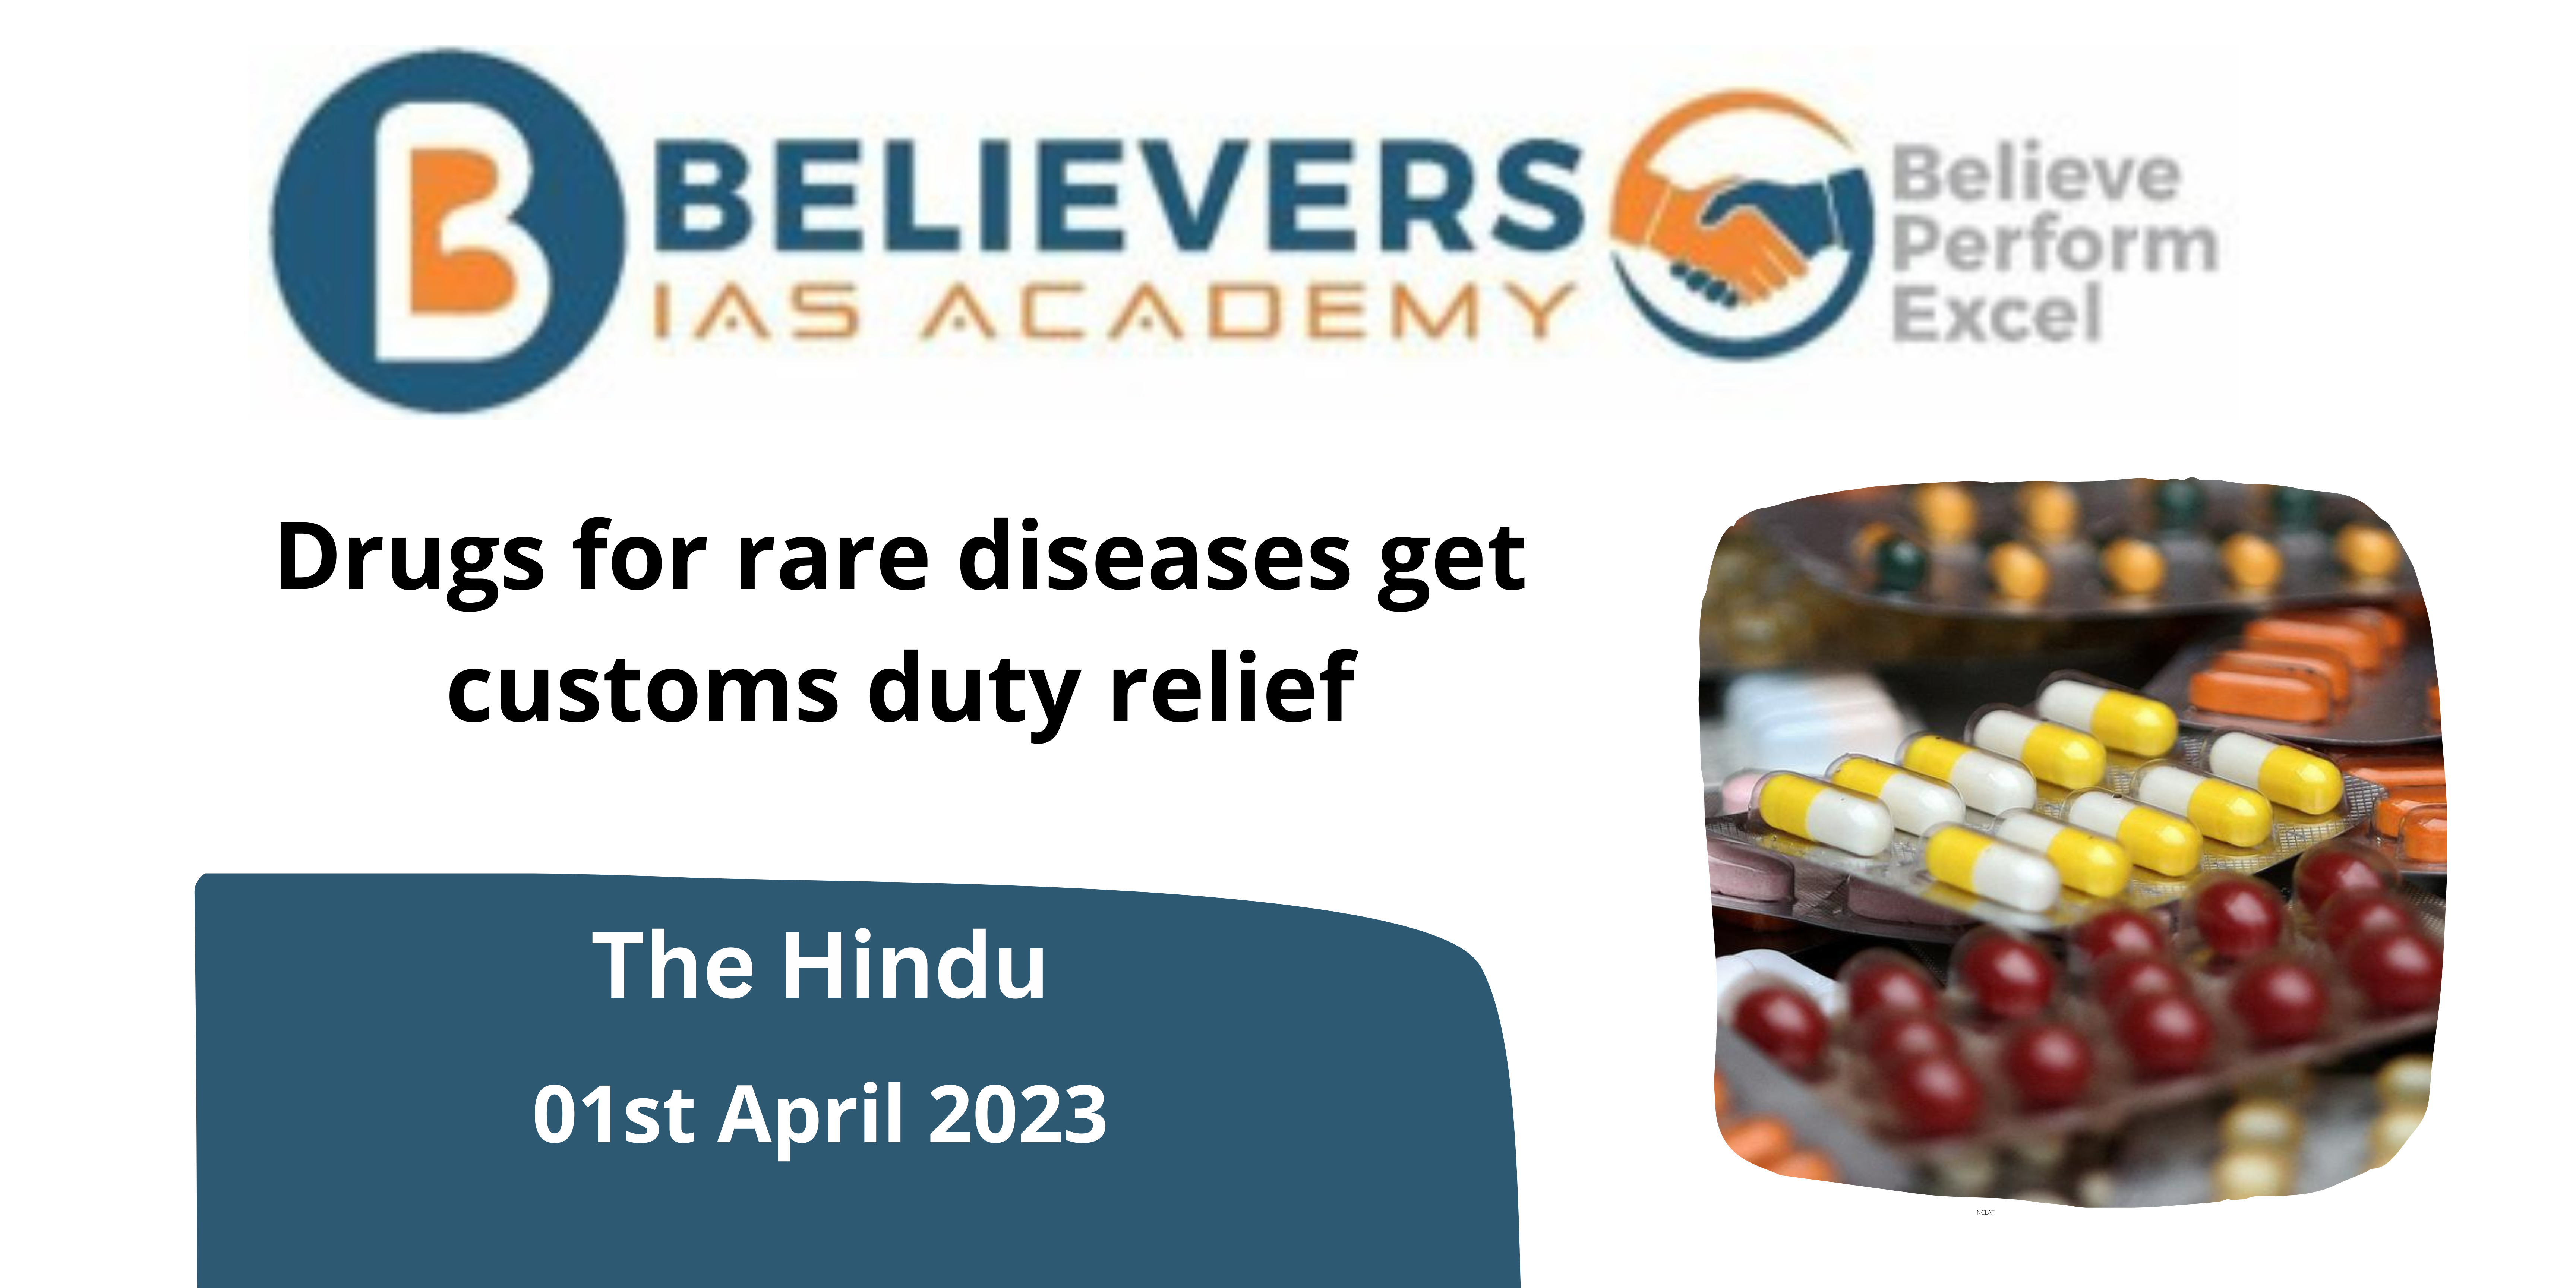 Drugs for rare diseases get customs duty relief